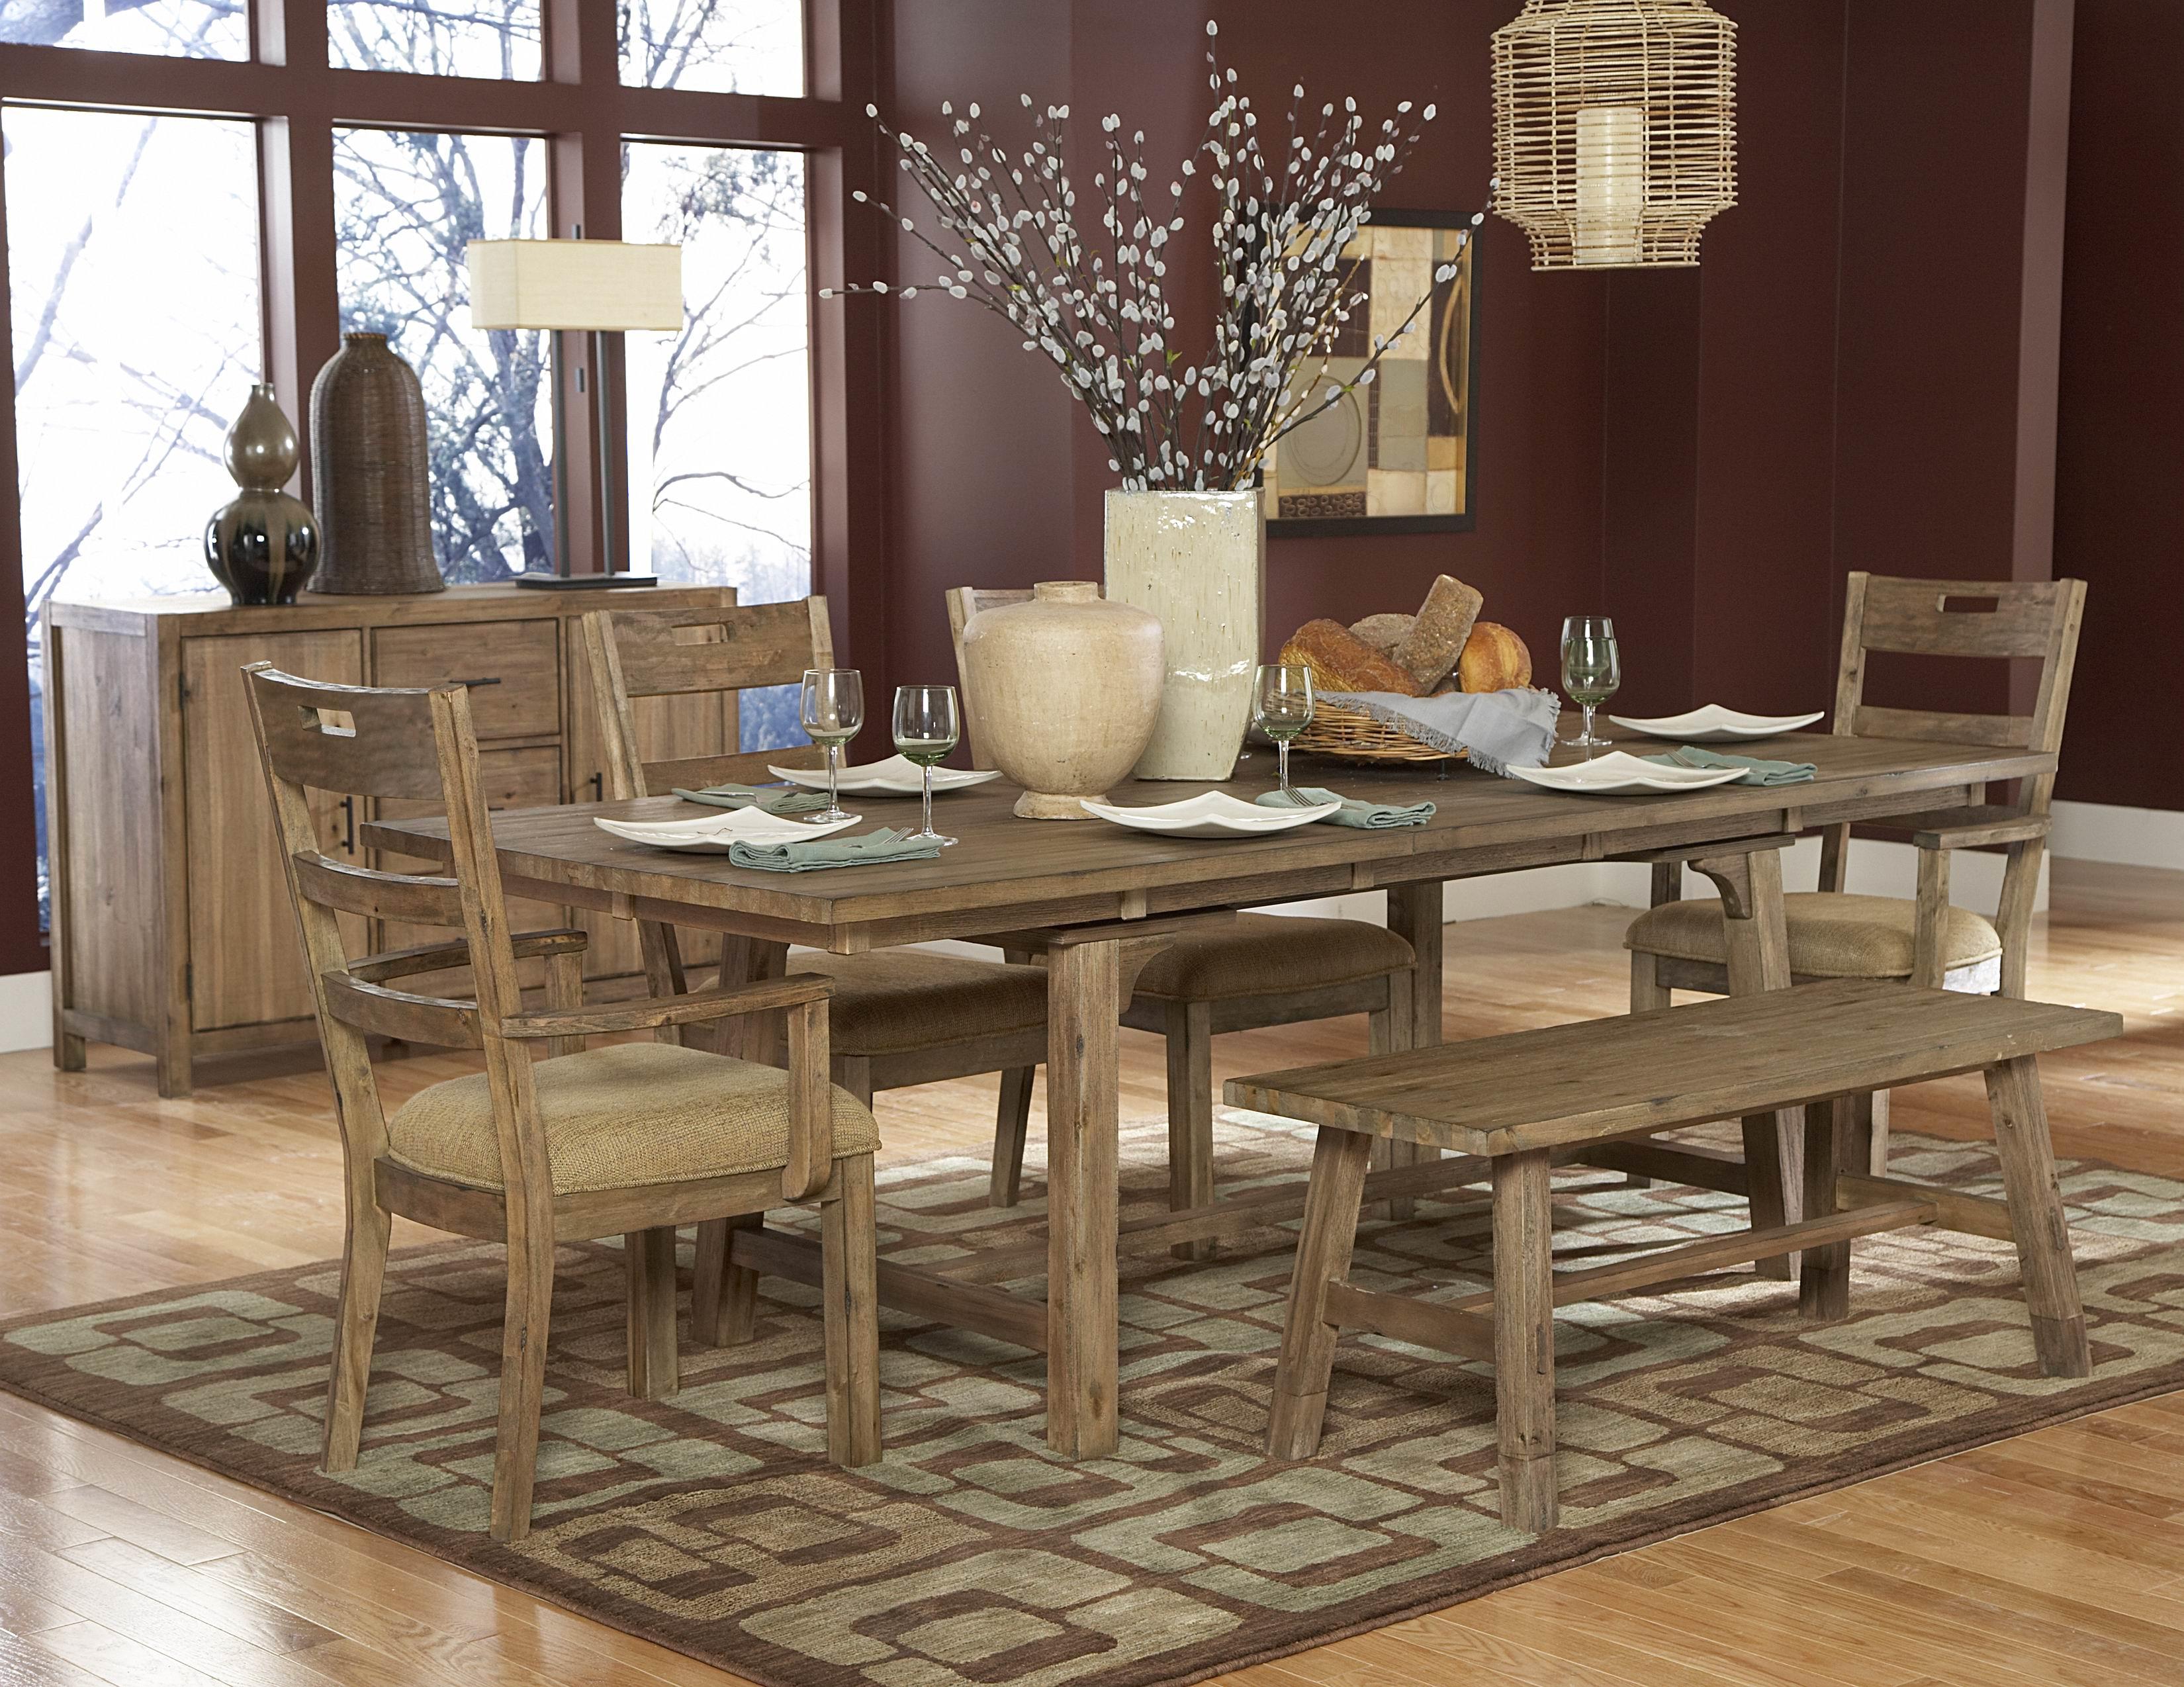 New Images Of Dining Room Furniture for Large Space